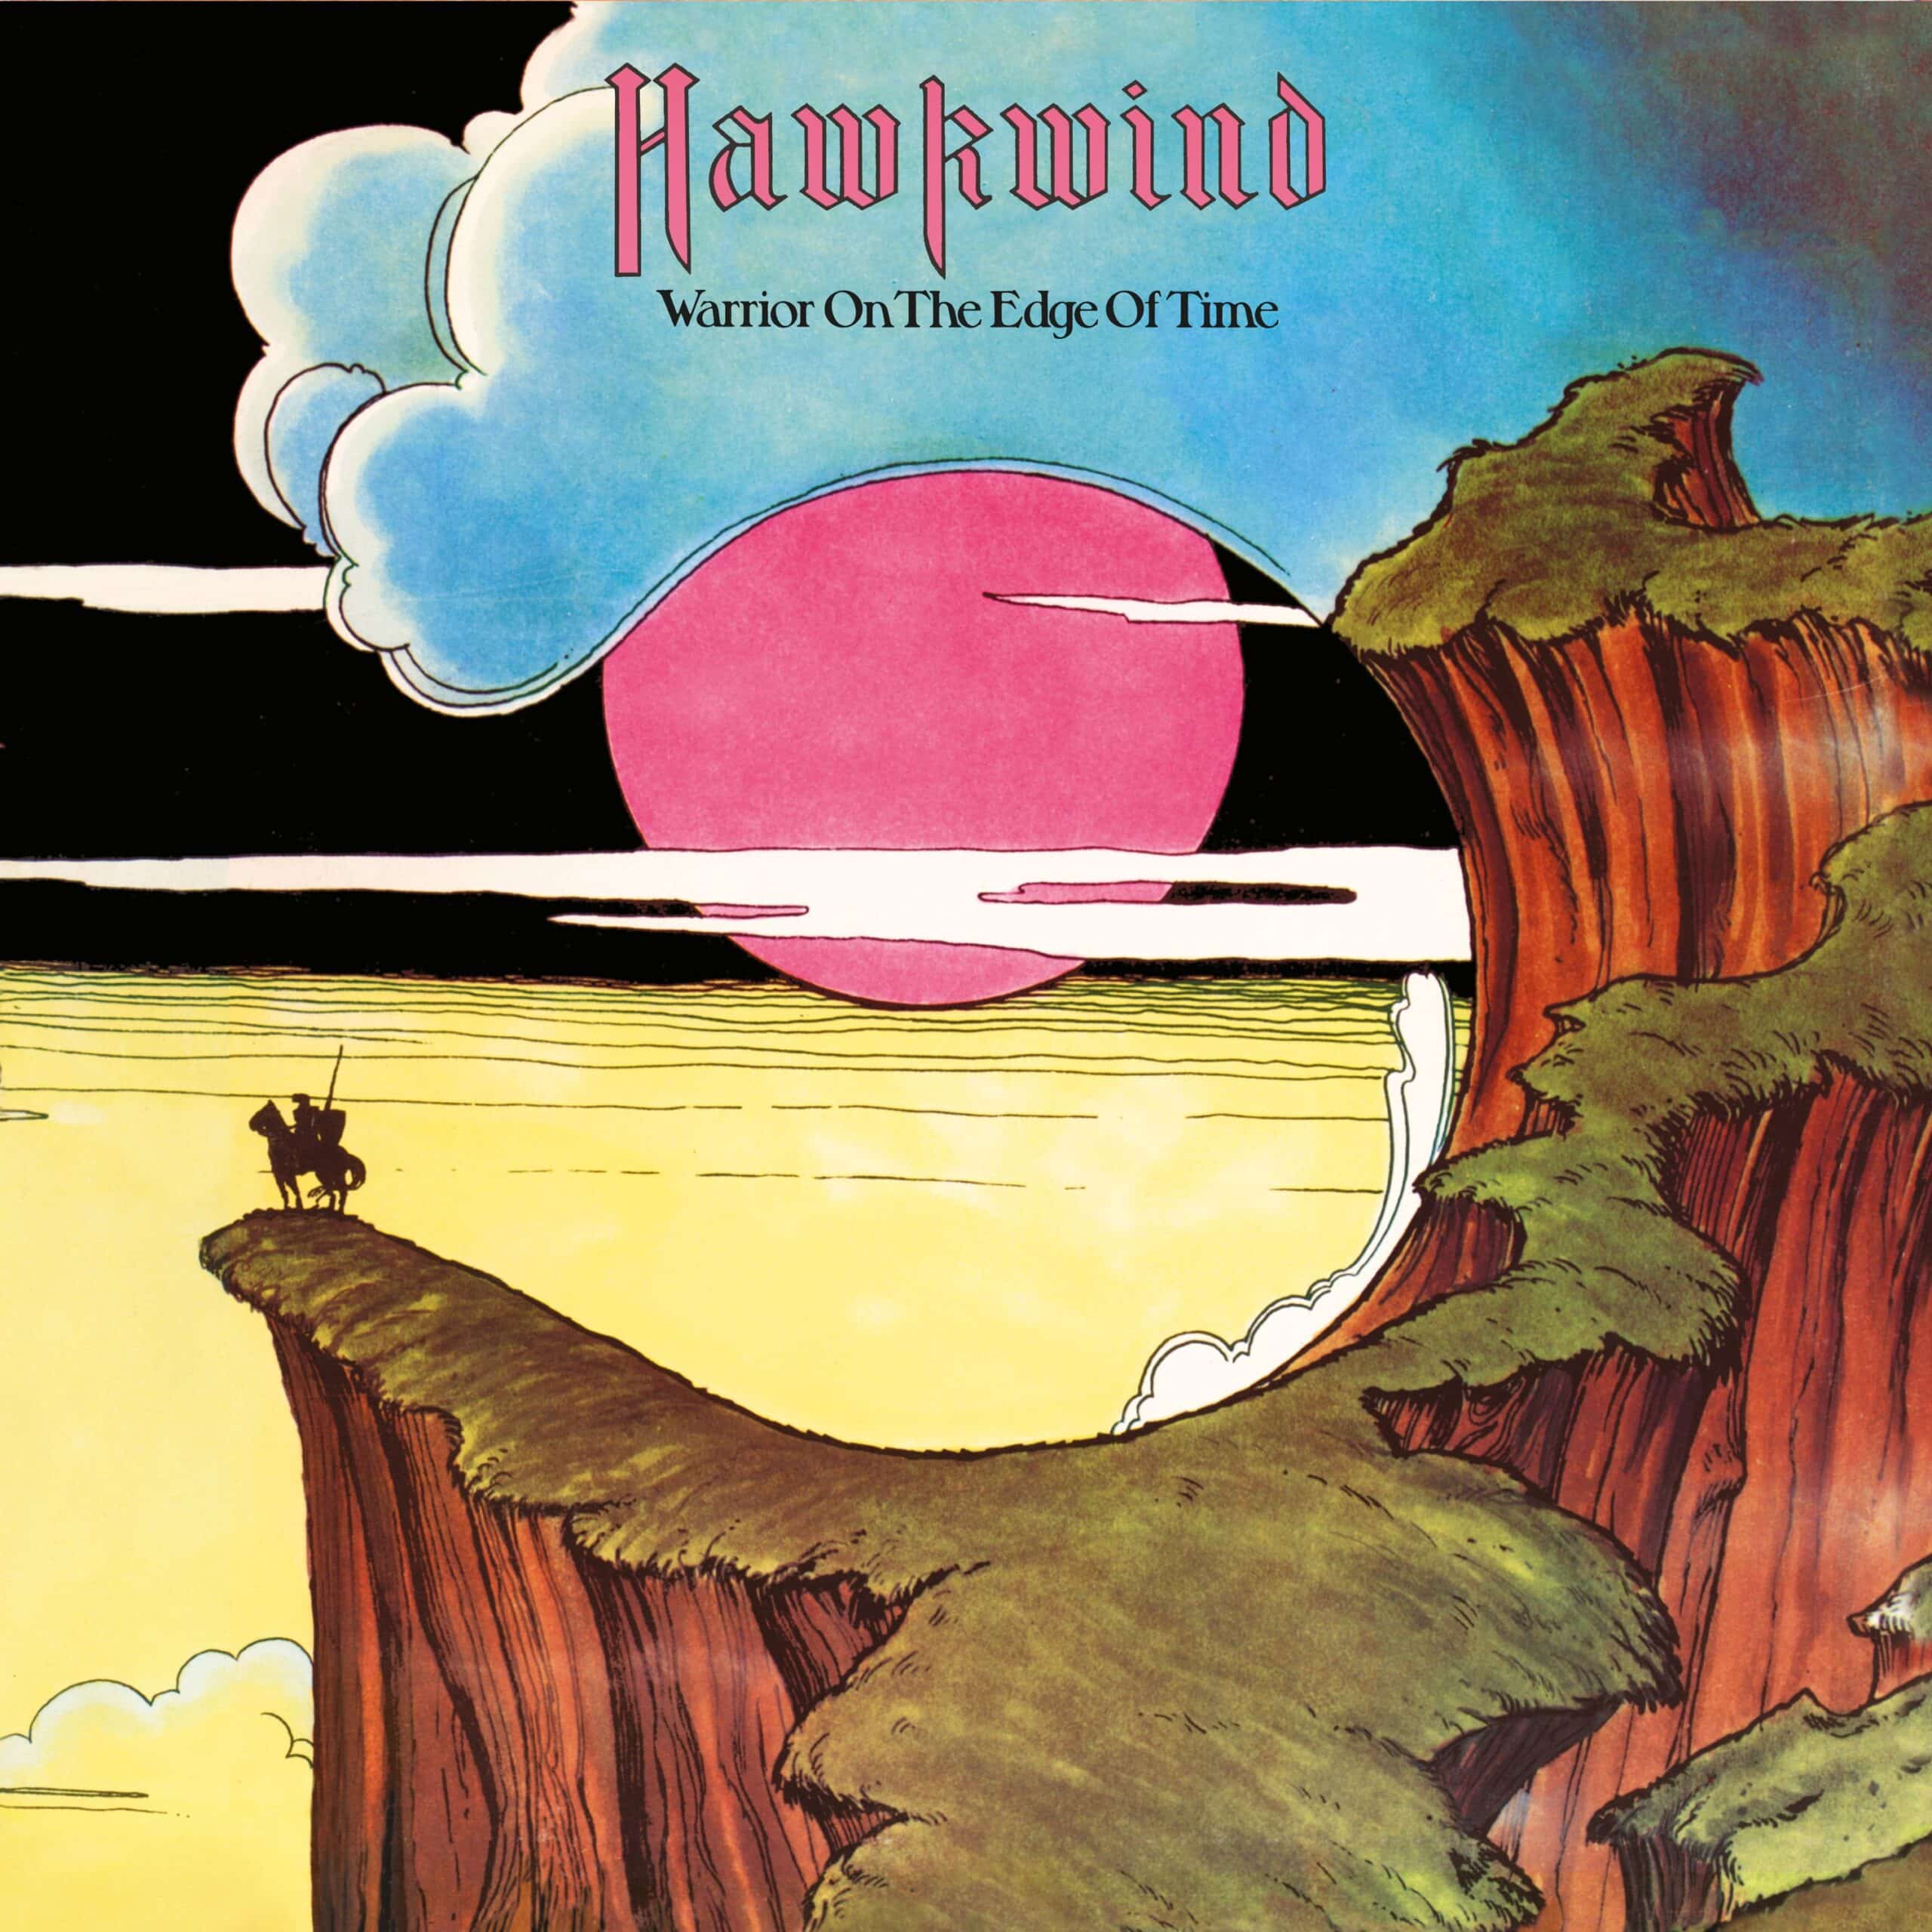 HAWKWIND - WARRIOR ON THE EDGE OF TIME (THE STEVEN WILSON REMIX)